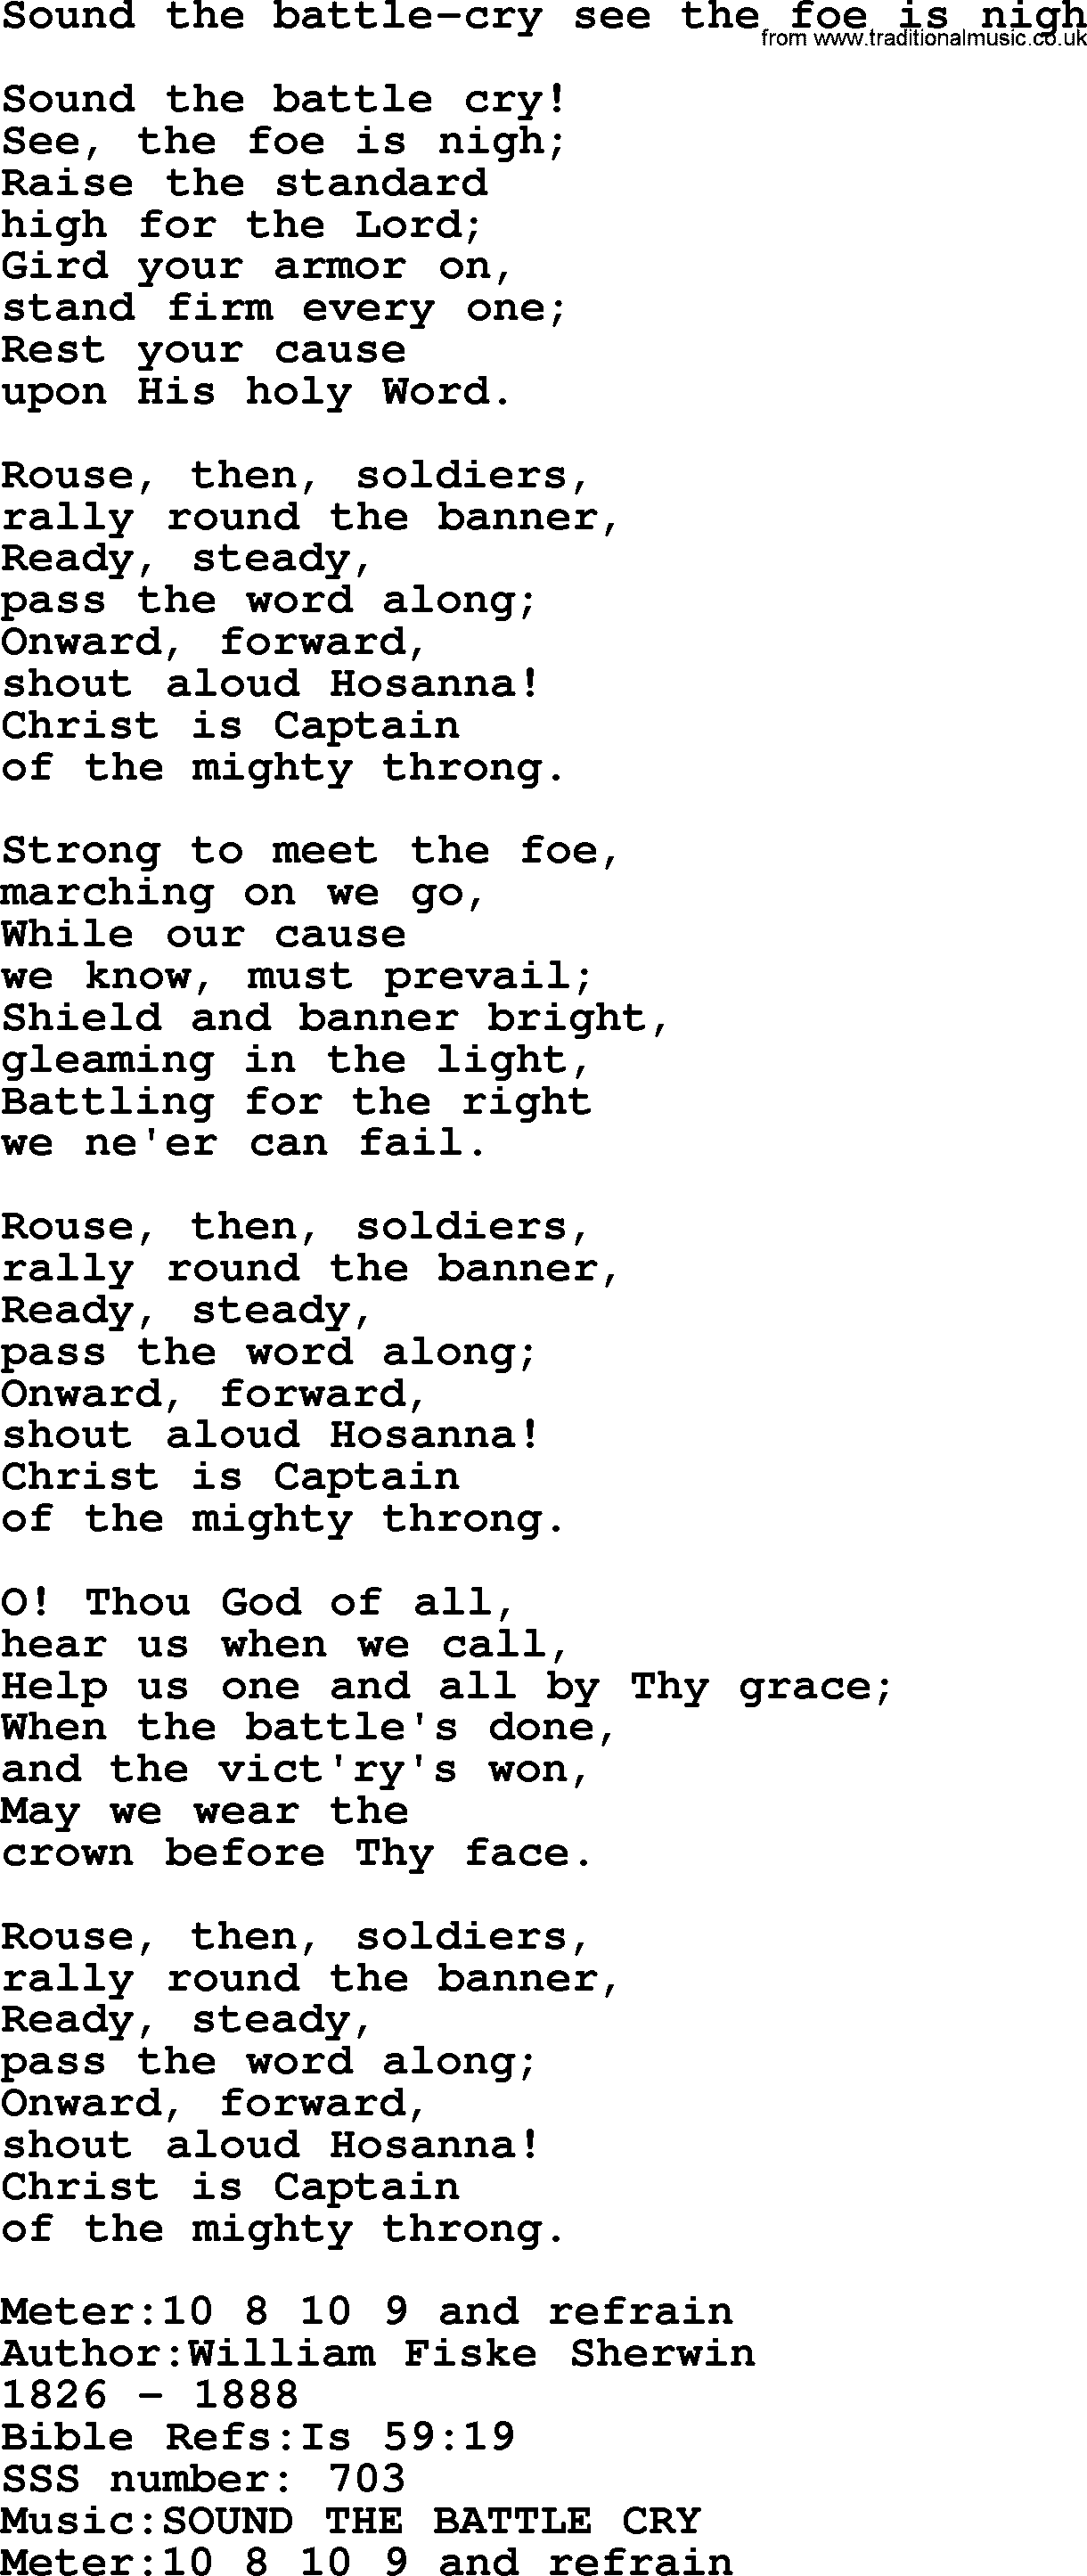 Sacred Songs and Solos complete, 1200 Hymns, title: Sound The Battle-Cry See The Foe Is Nigh, lyrics and PDF